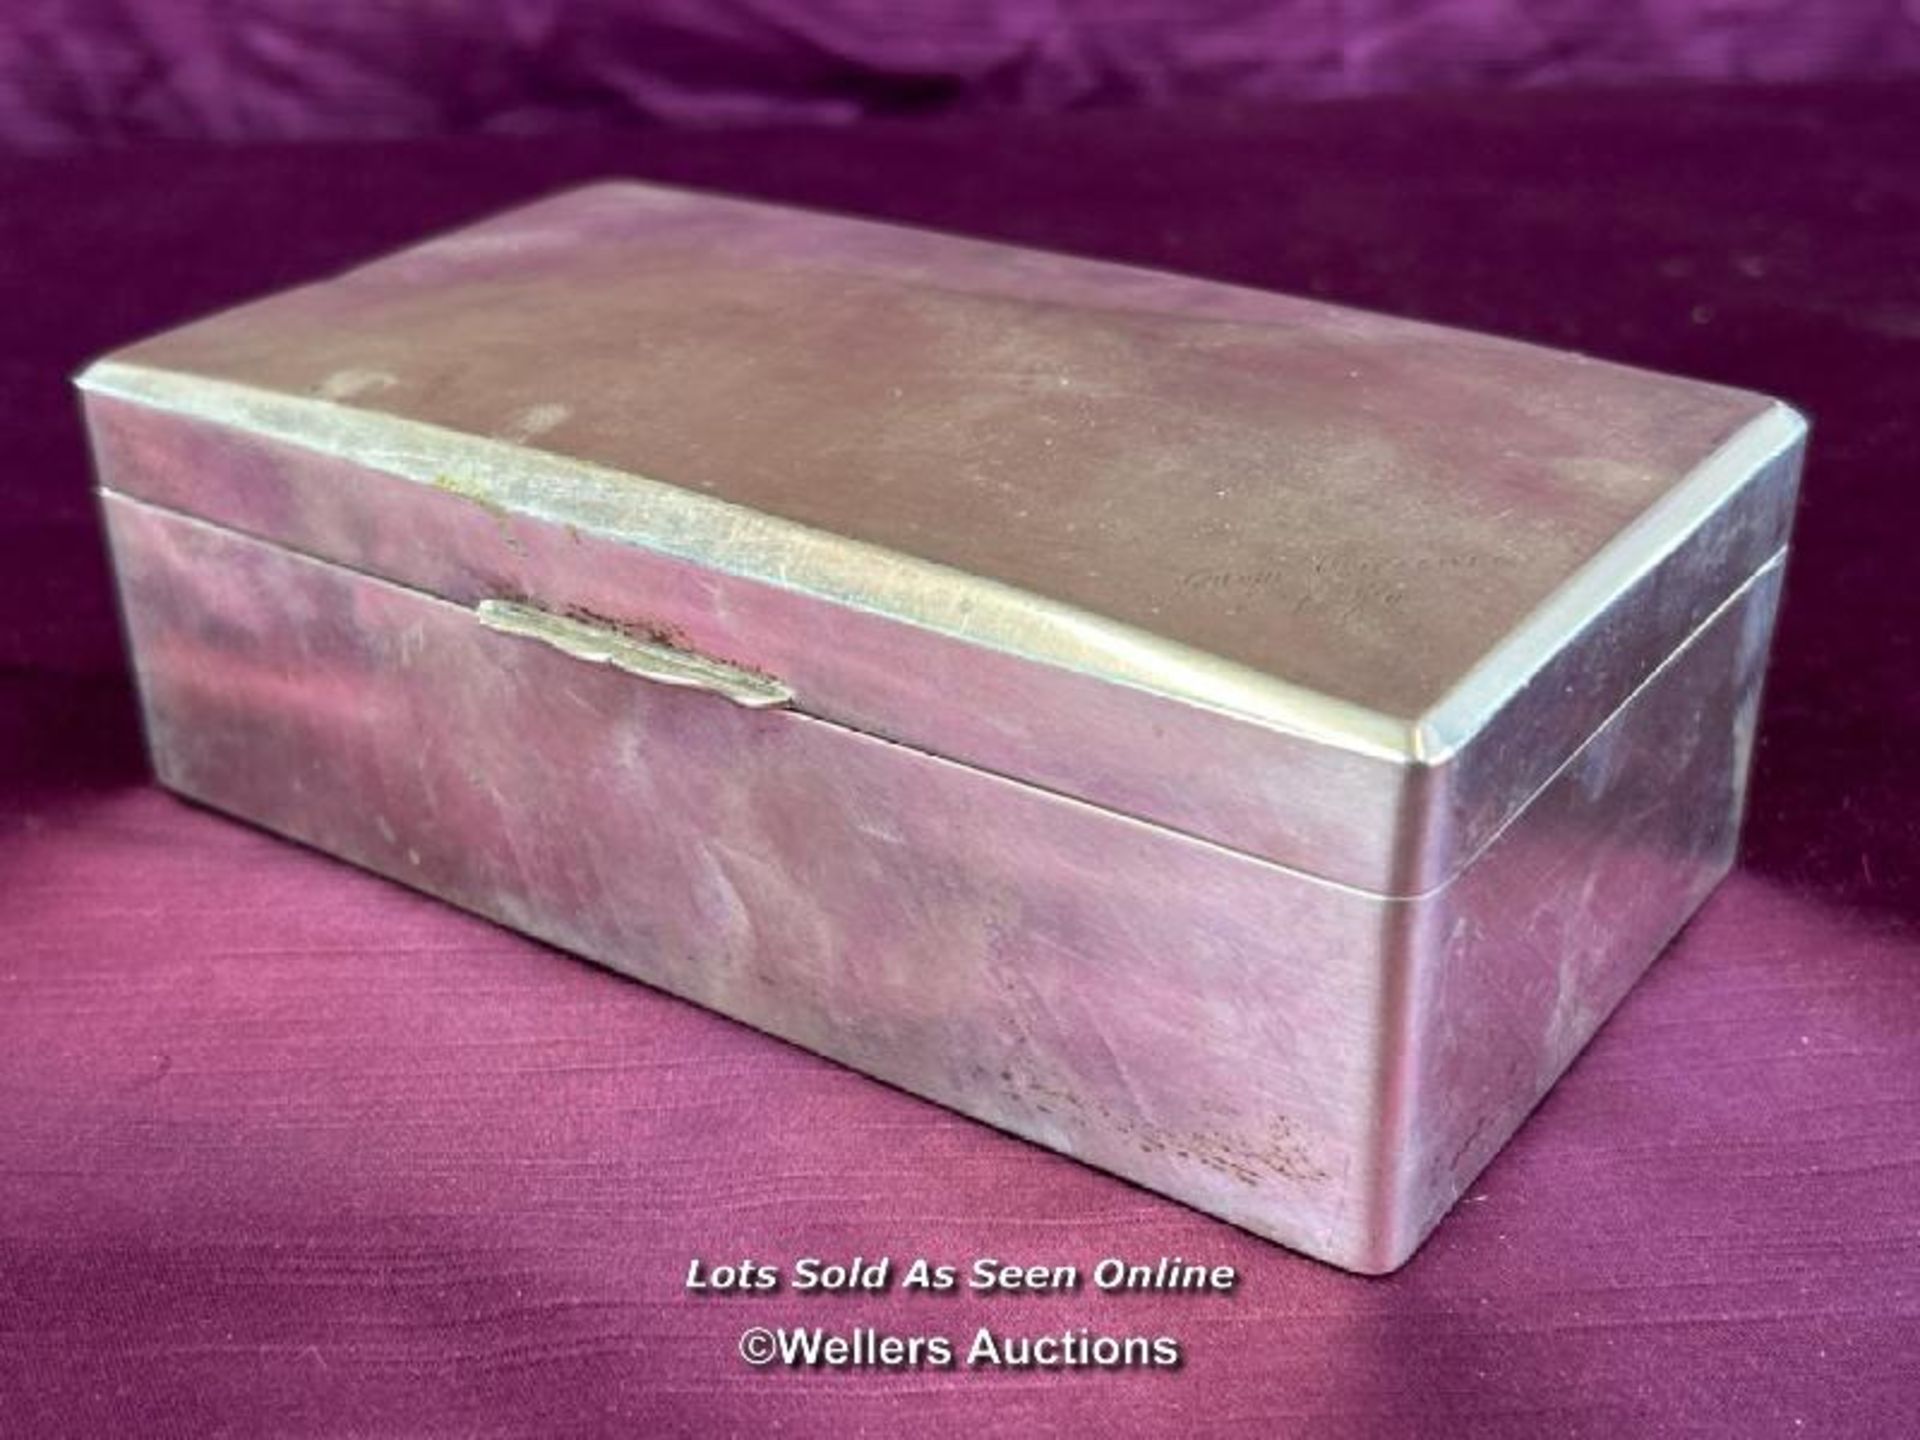 WHITE METAL AND WOODEN TRINKET BOX WITH INSCRIPTION 'FROM QUEENIE TO JO', DATED 13/04/48, 16.5 X 9 X